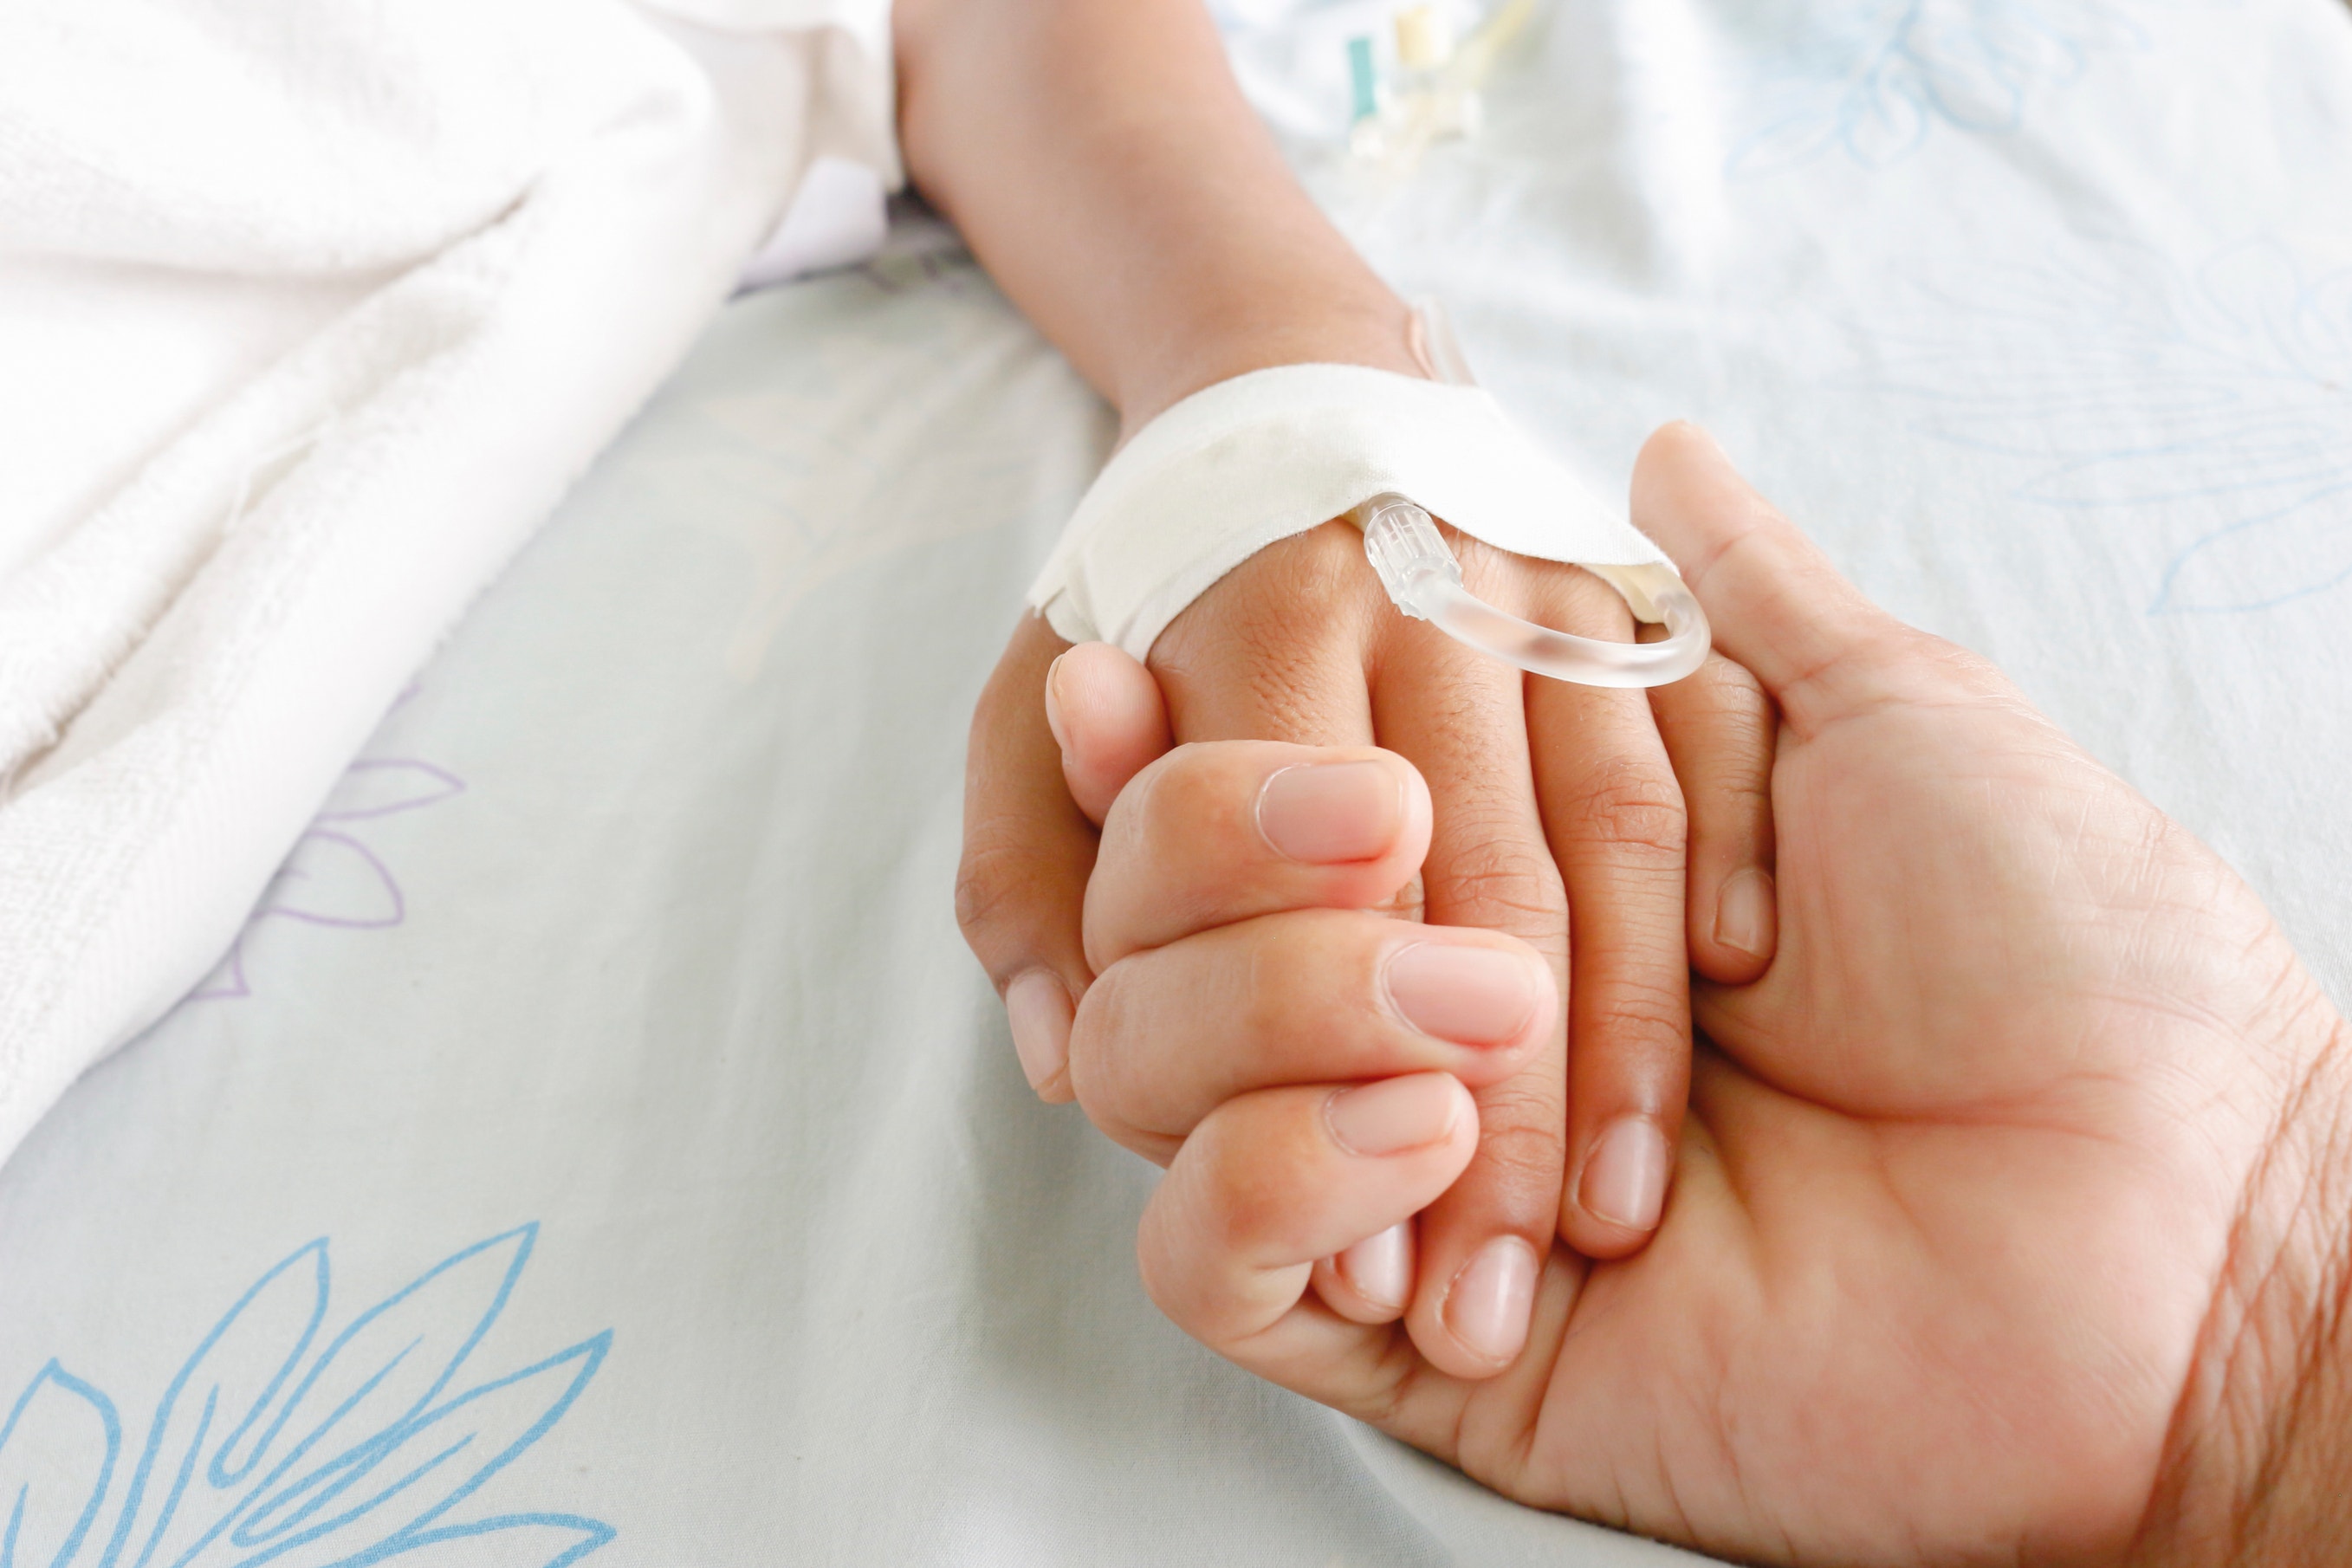 mother holding child's hand who fever patients have IV tube. (iStock)